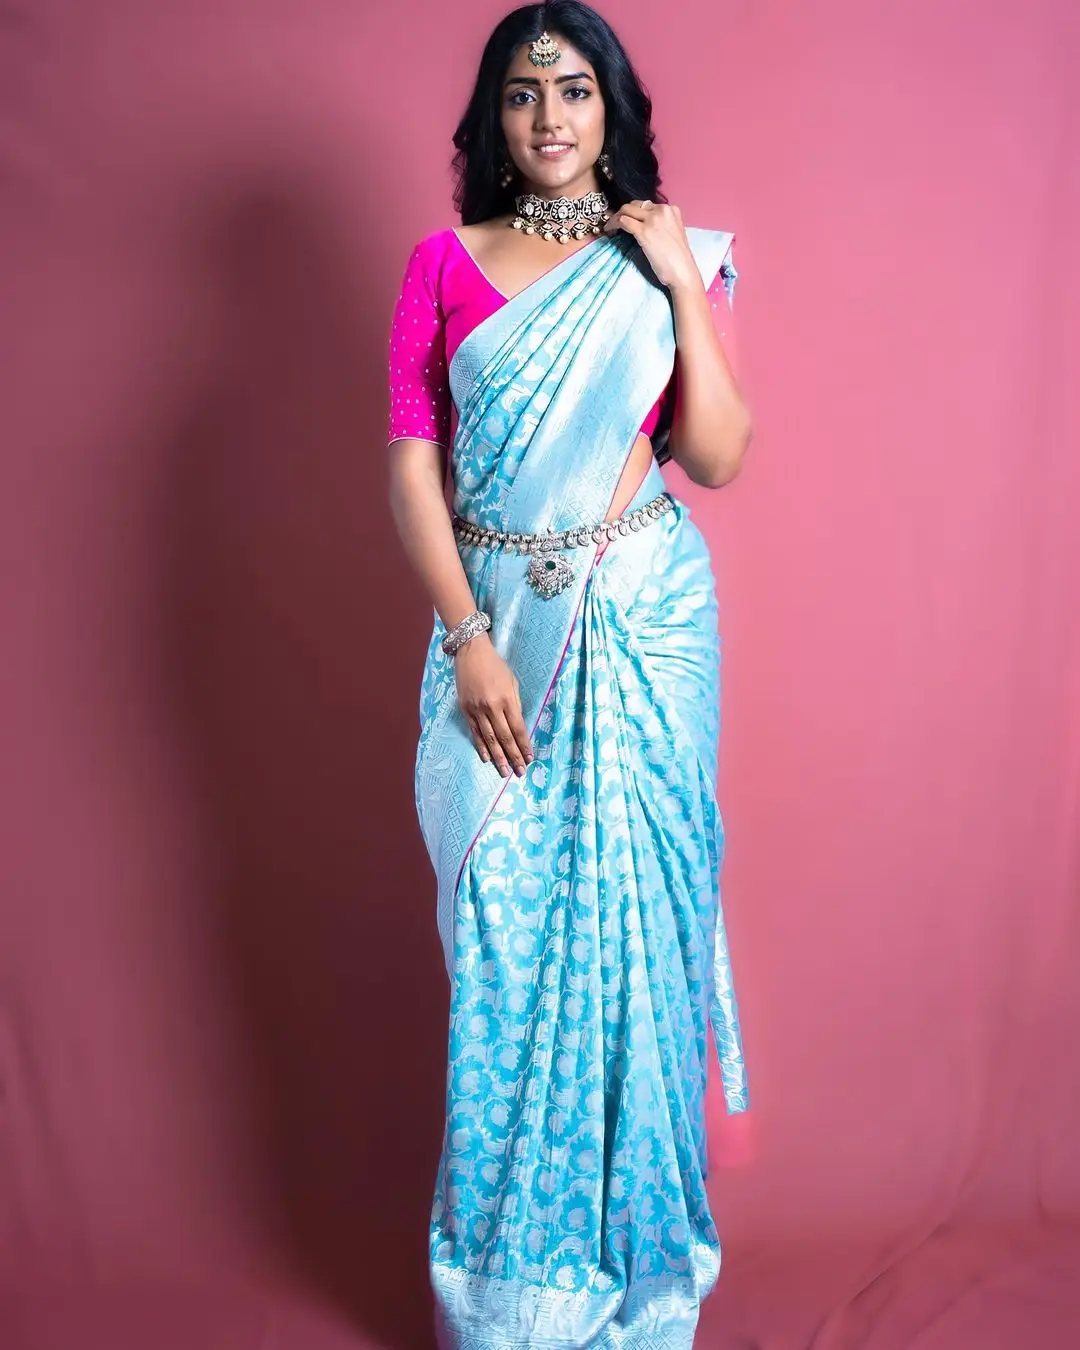 EESHA REBBA IN SOUTH INDIAN TRADITIONAL BLUE SAREE PINK BLOUSE 7